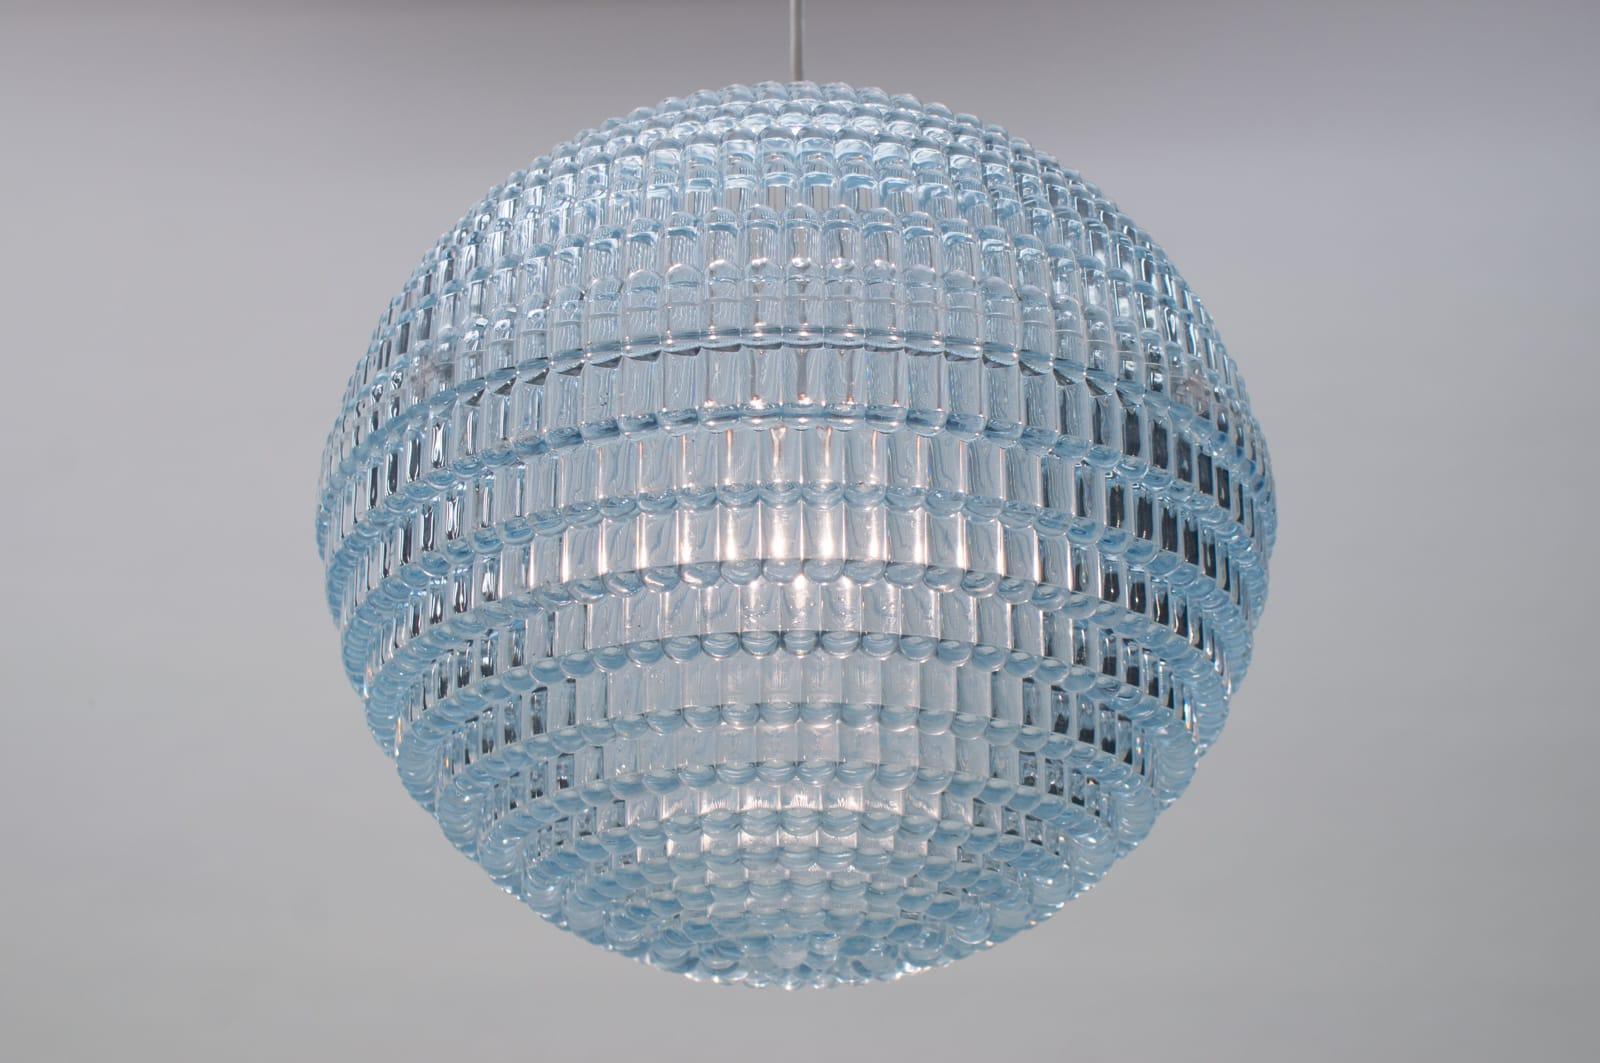 Mid-20th Century Rare Ceiling Geometric Lamp by Aloys F. Gangkofner for Erco Leuchten, 1960 For Sale